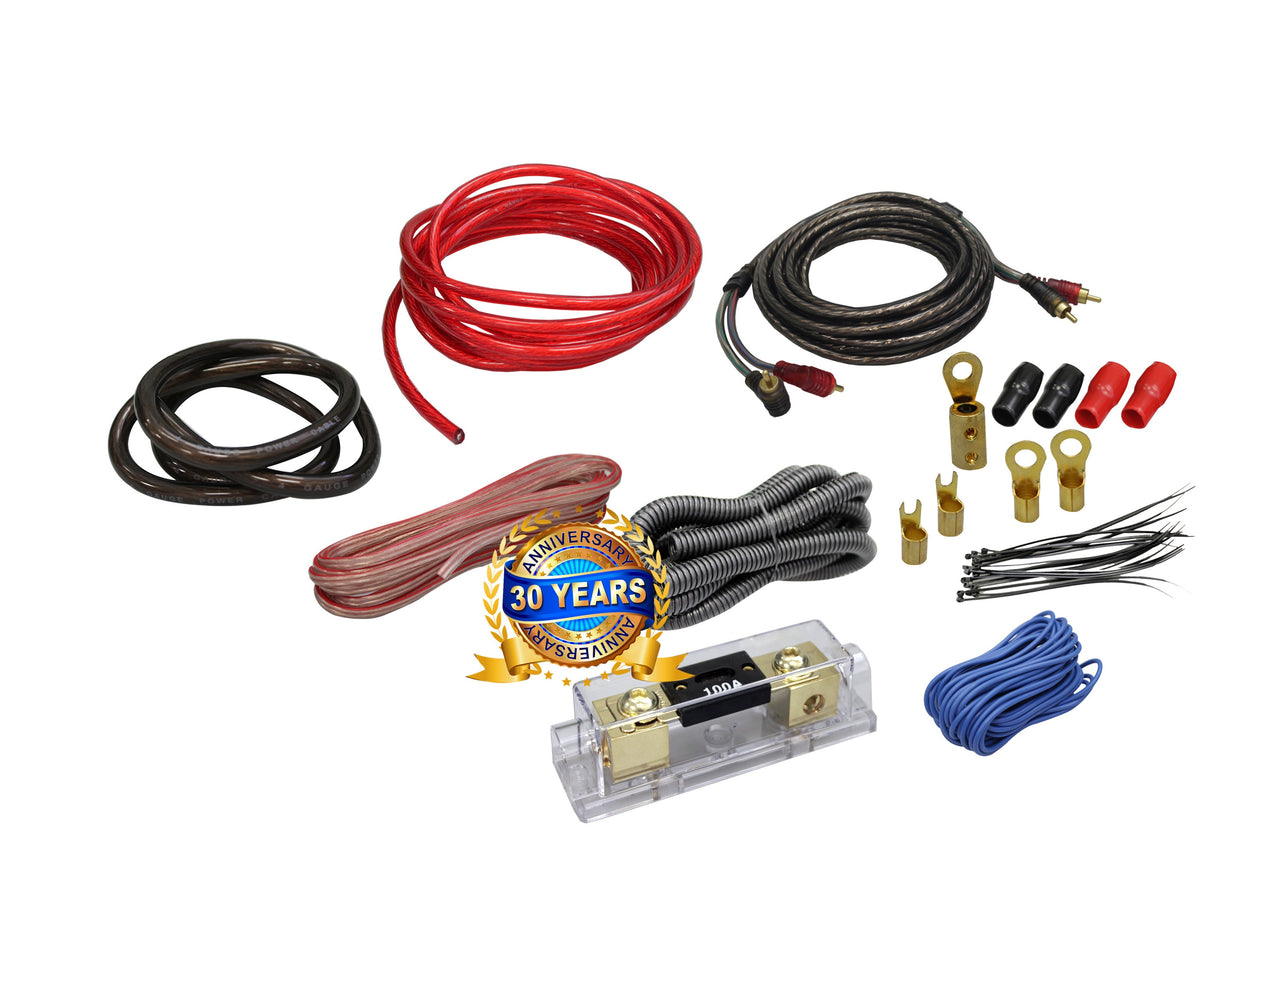 Car Audio 4 Gauge Amplifier Install Kit Complete Amp Wiring Cables